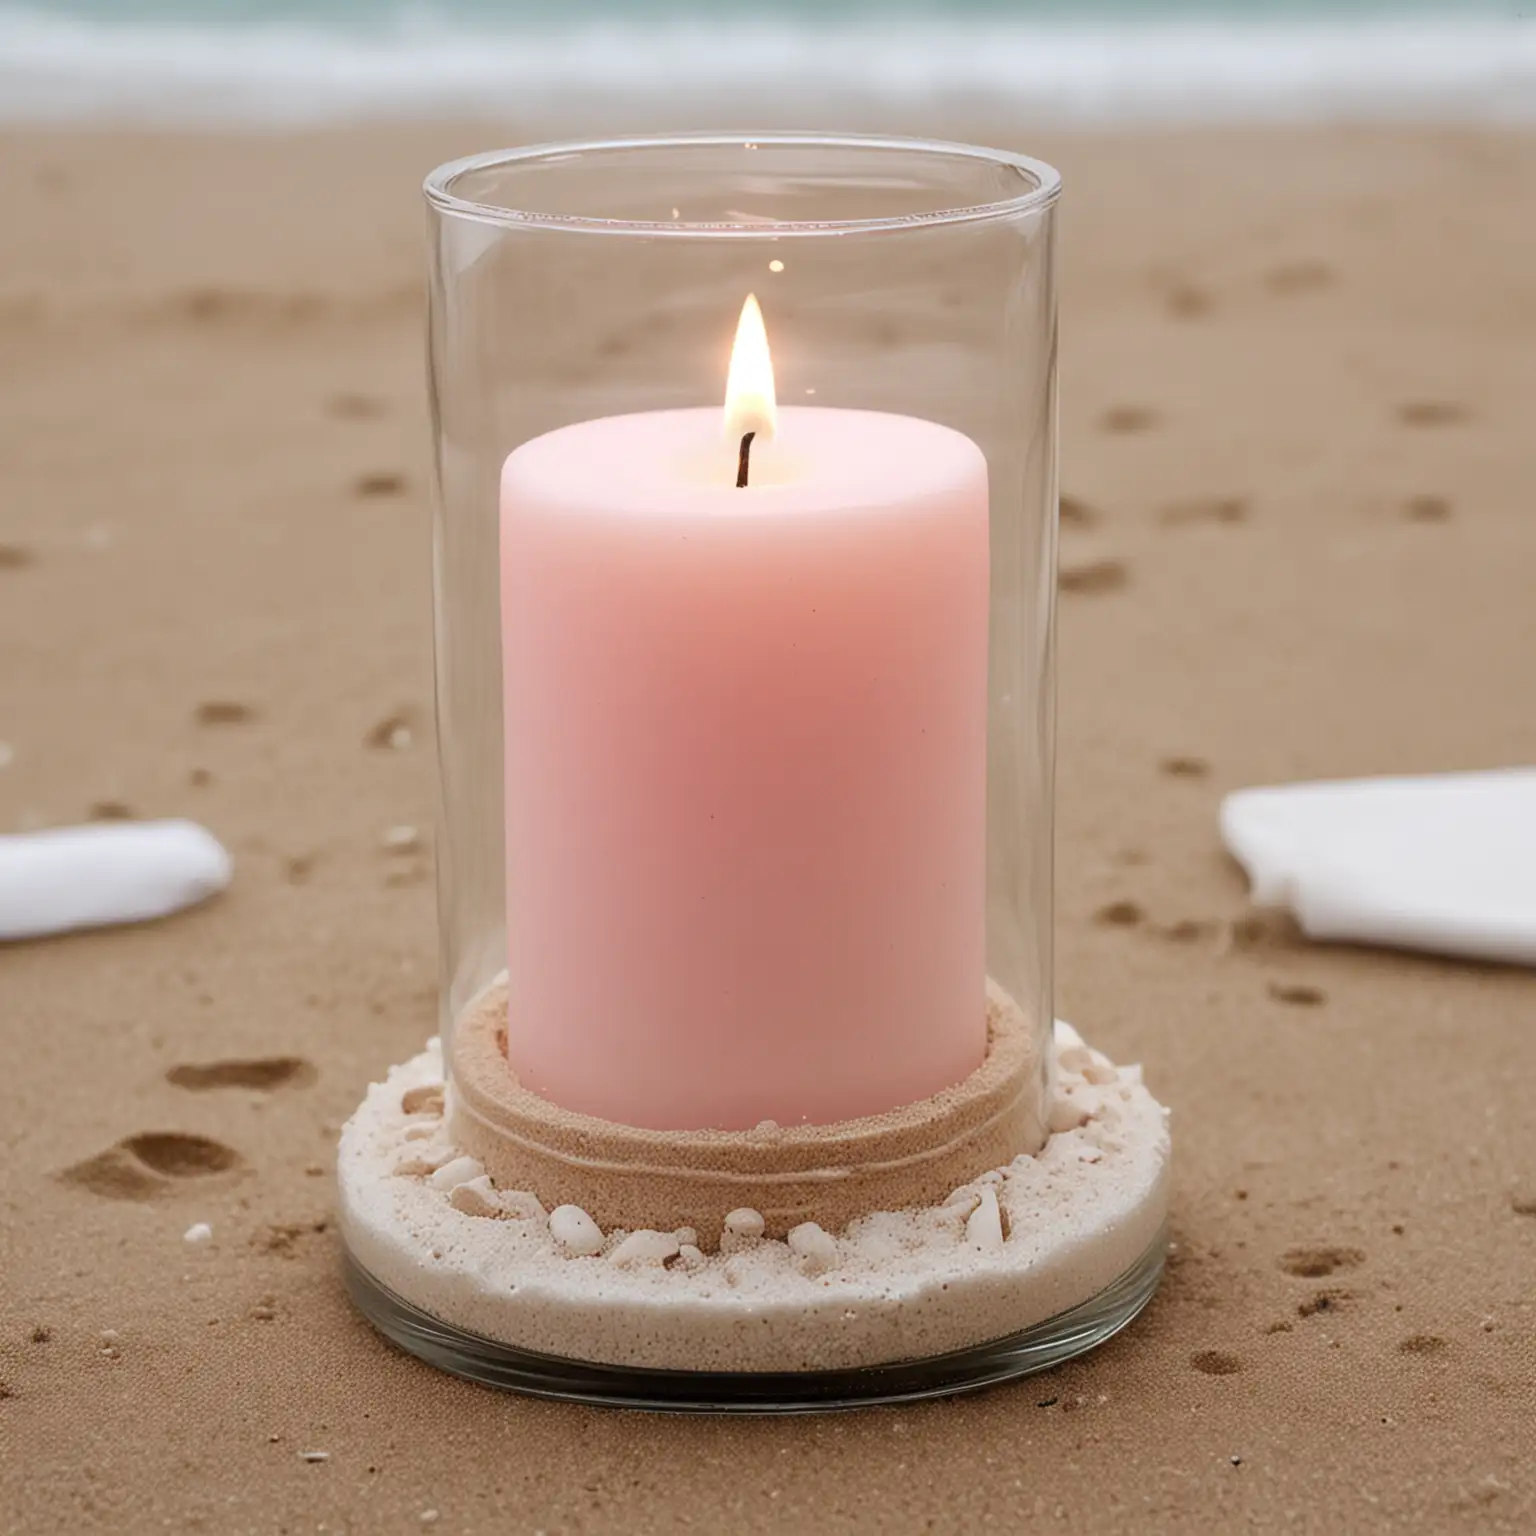 simple beach theme wedding centerpiece with cylinder glass vase holding a blush pink pillar candle and sand setting on a small round glass base; keep background neutral